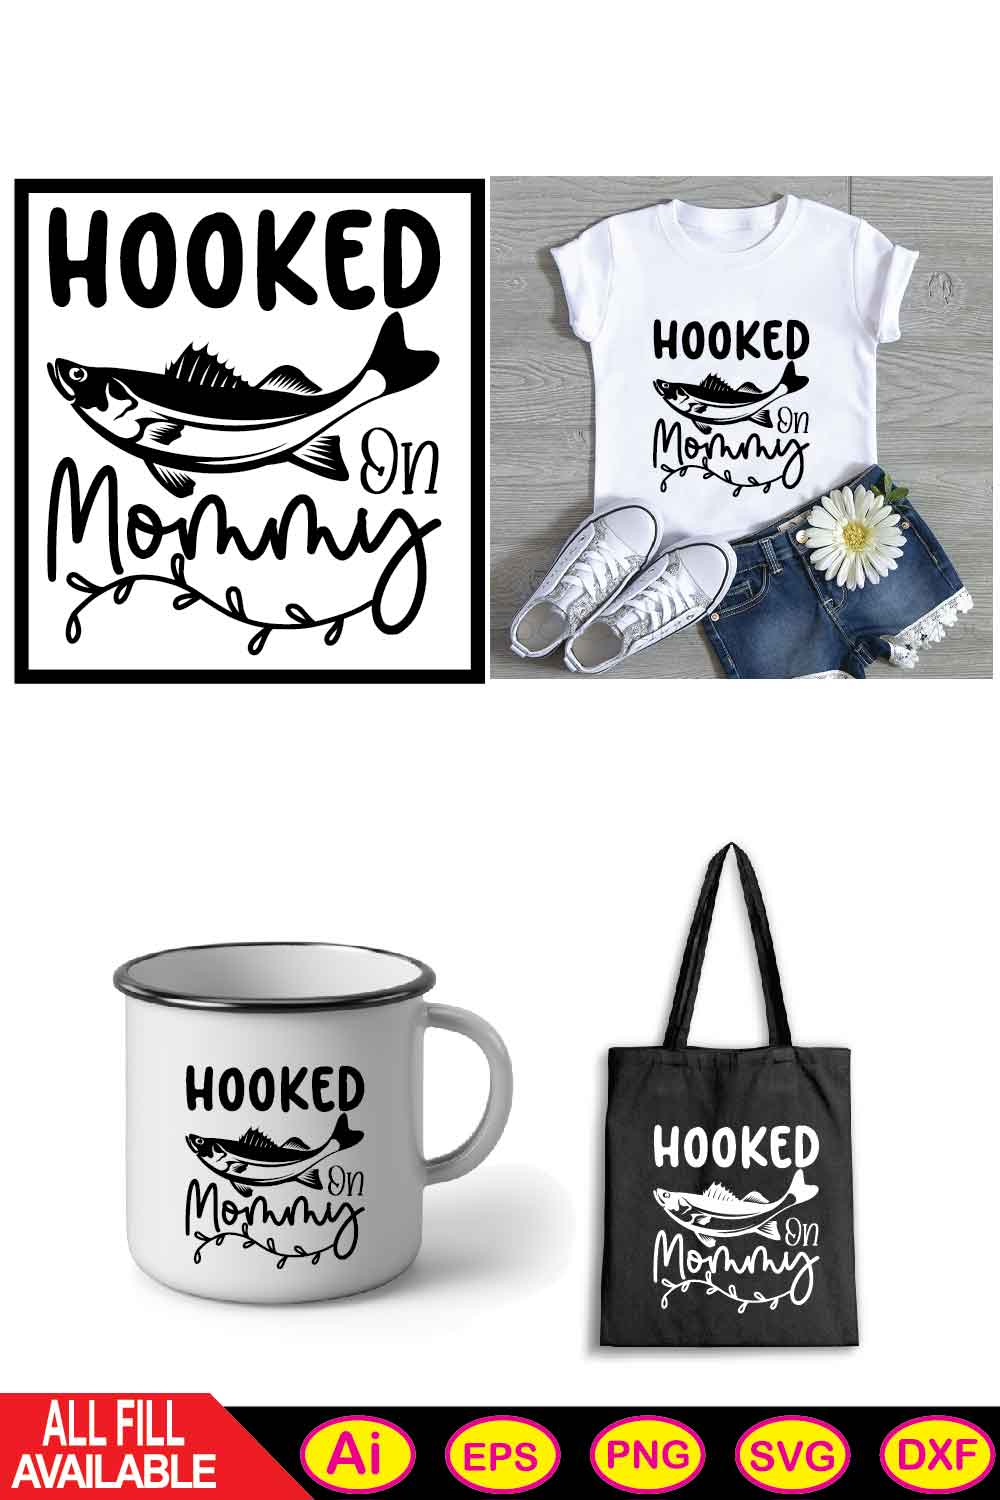 HOOKED ON Mommy svg t-shirt pinterest preview image.